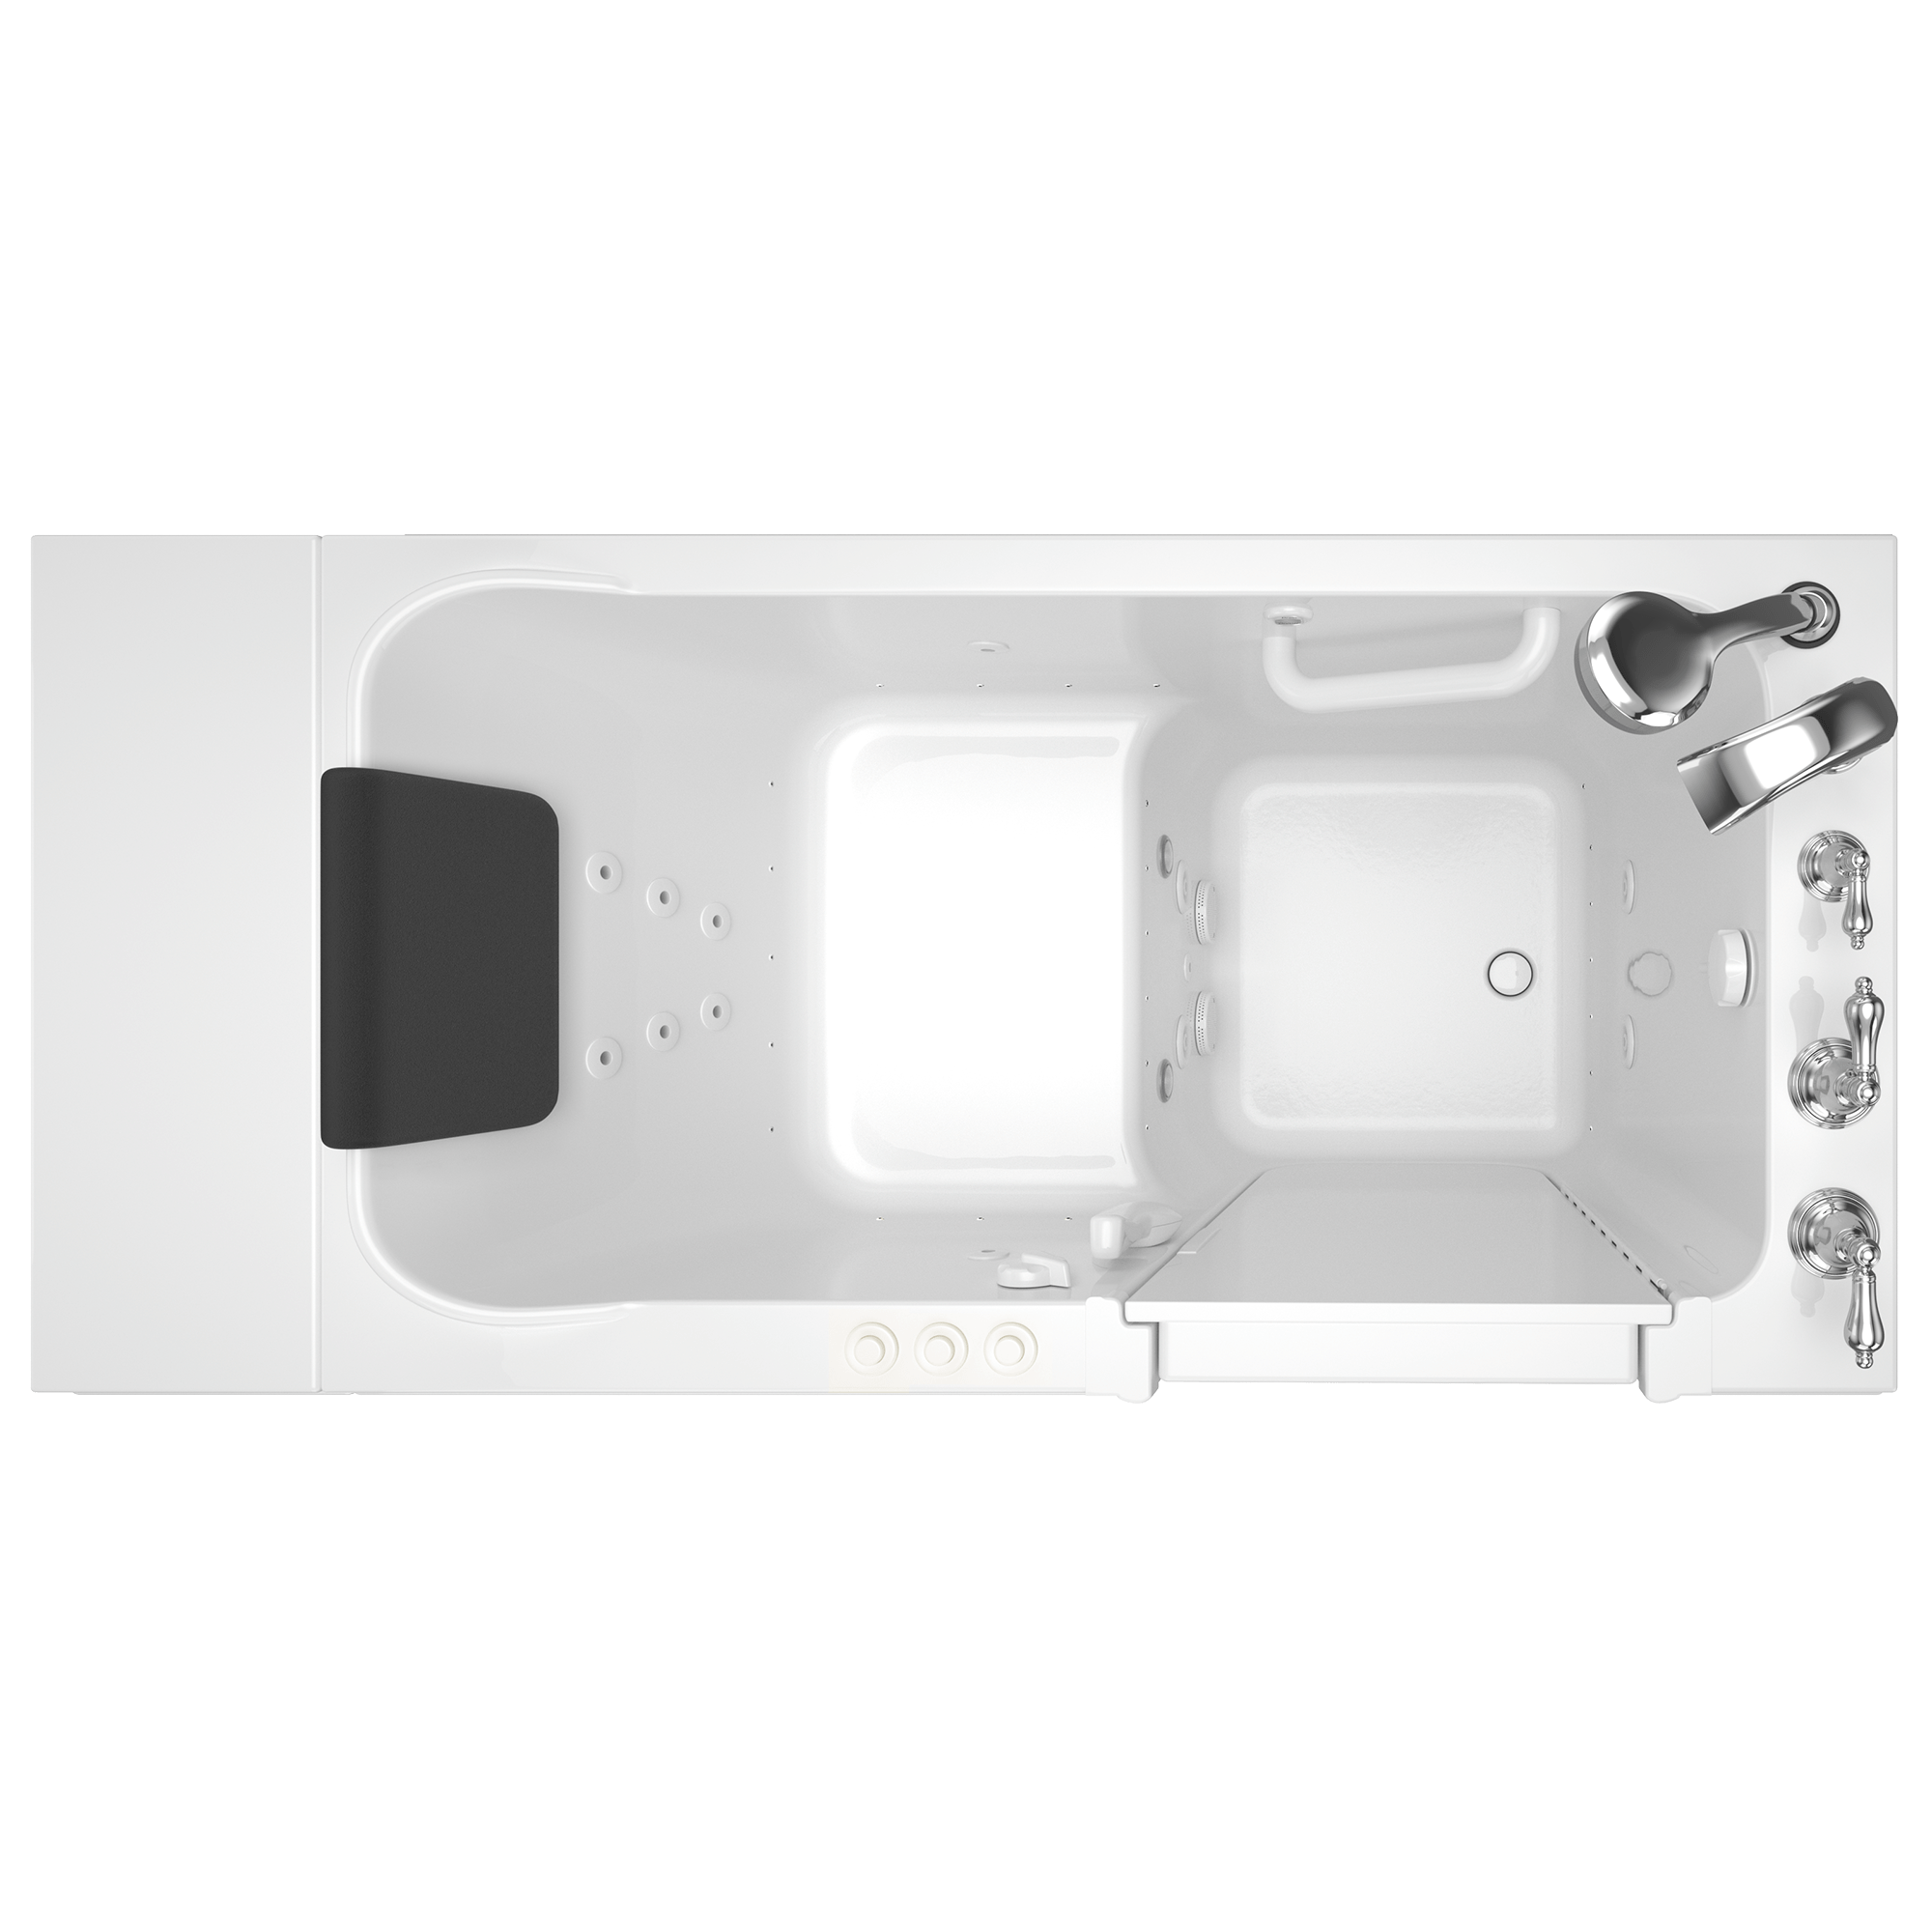 Acrylic Luxury Series 28 x 48 Inch Walk in Tub With Combination Air Spa and Whirlpool Systems   Right Hand Drain With Faucet WIB WHITE